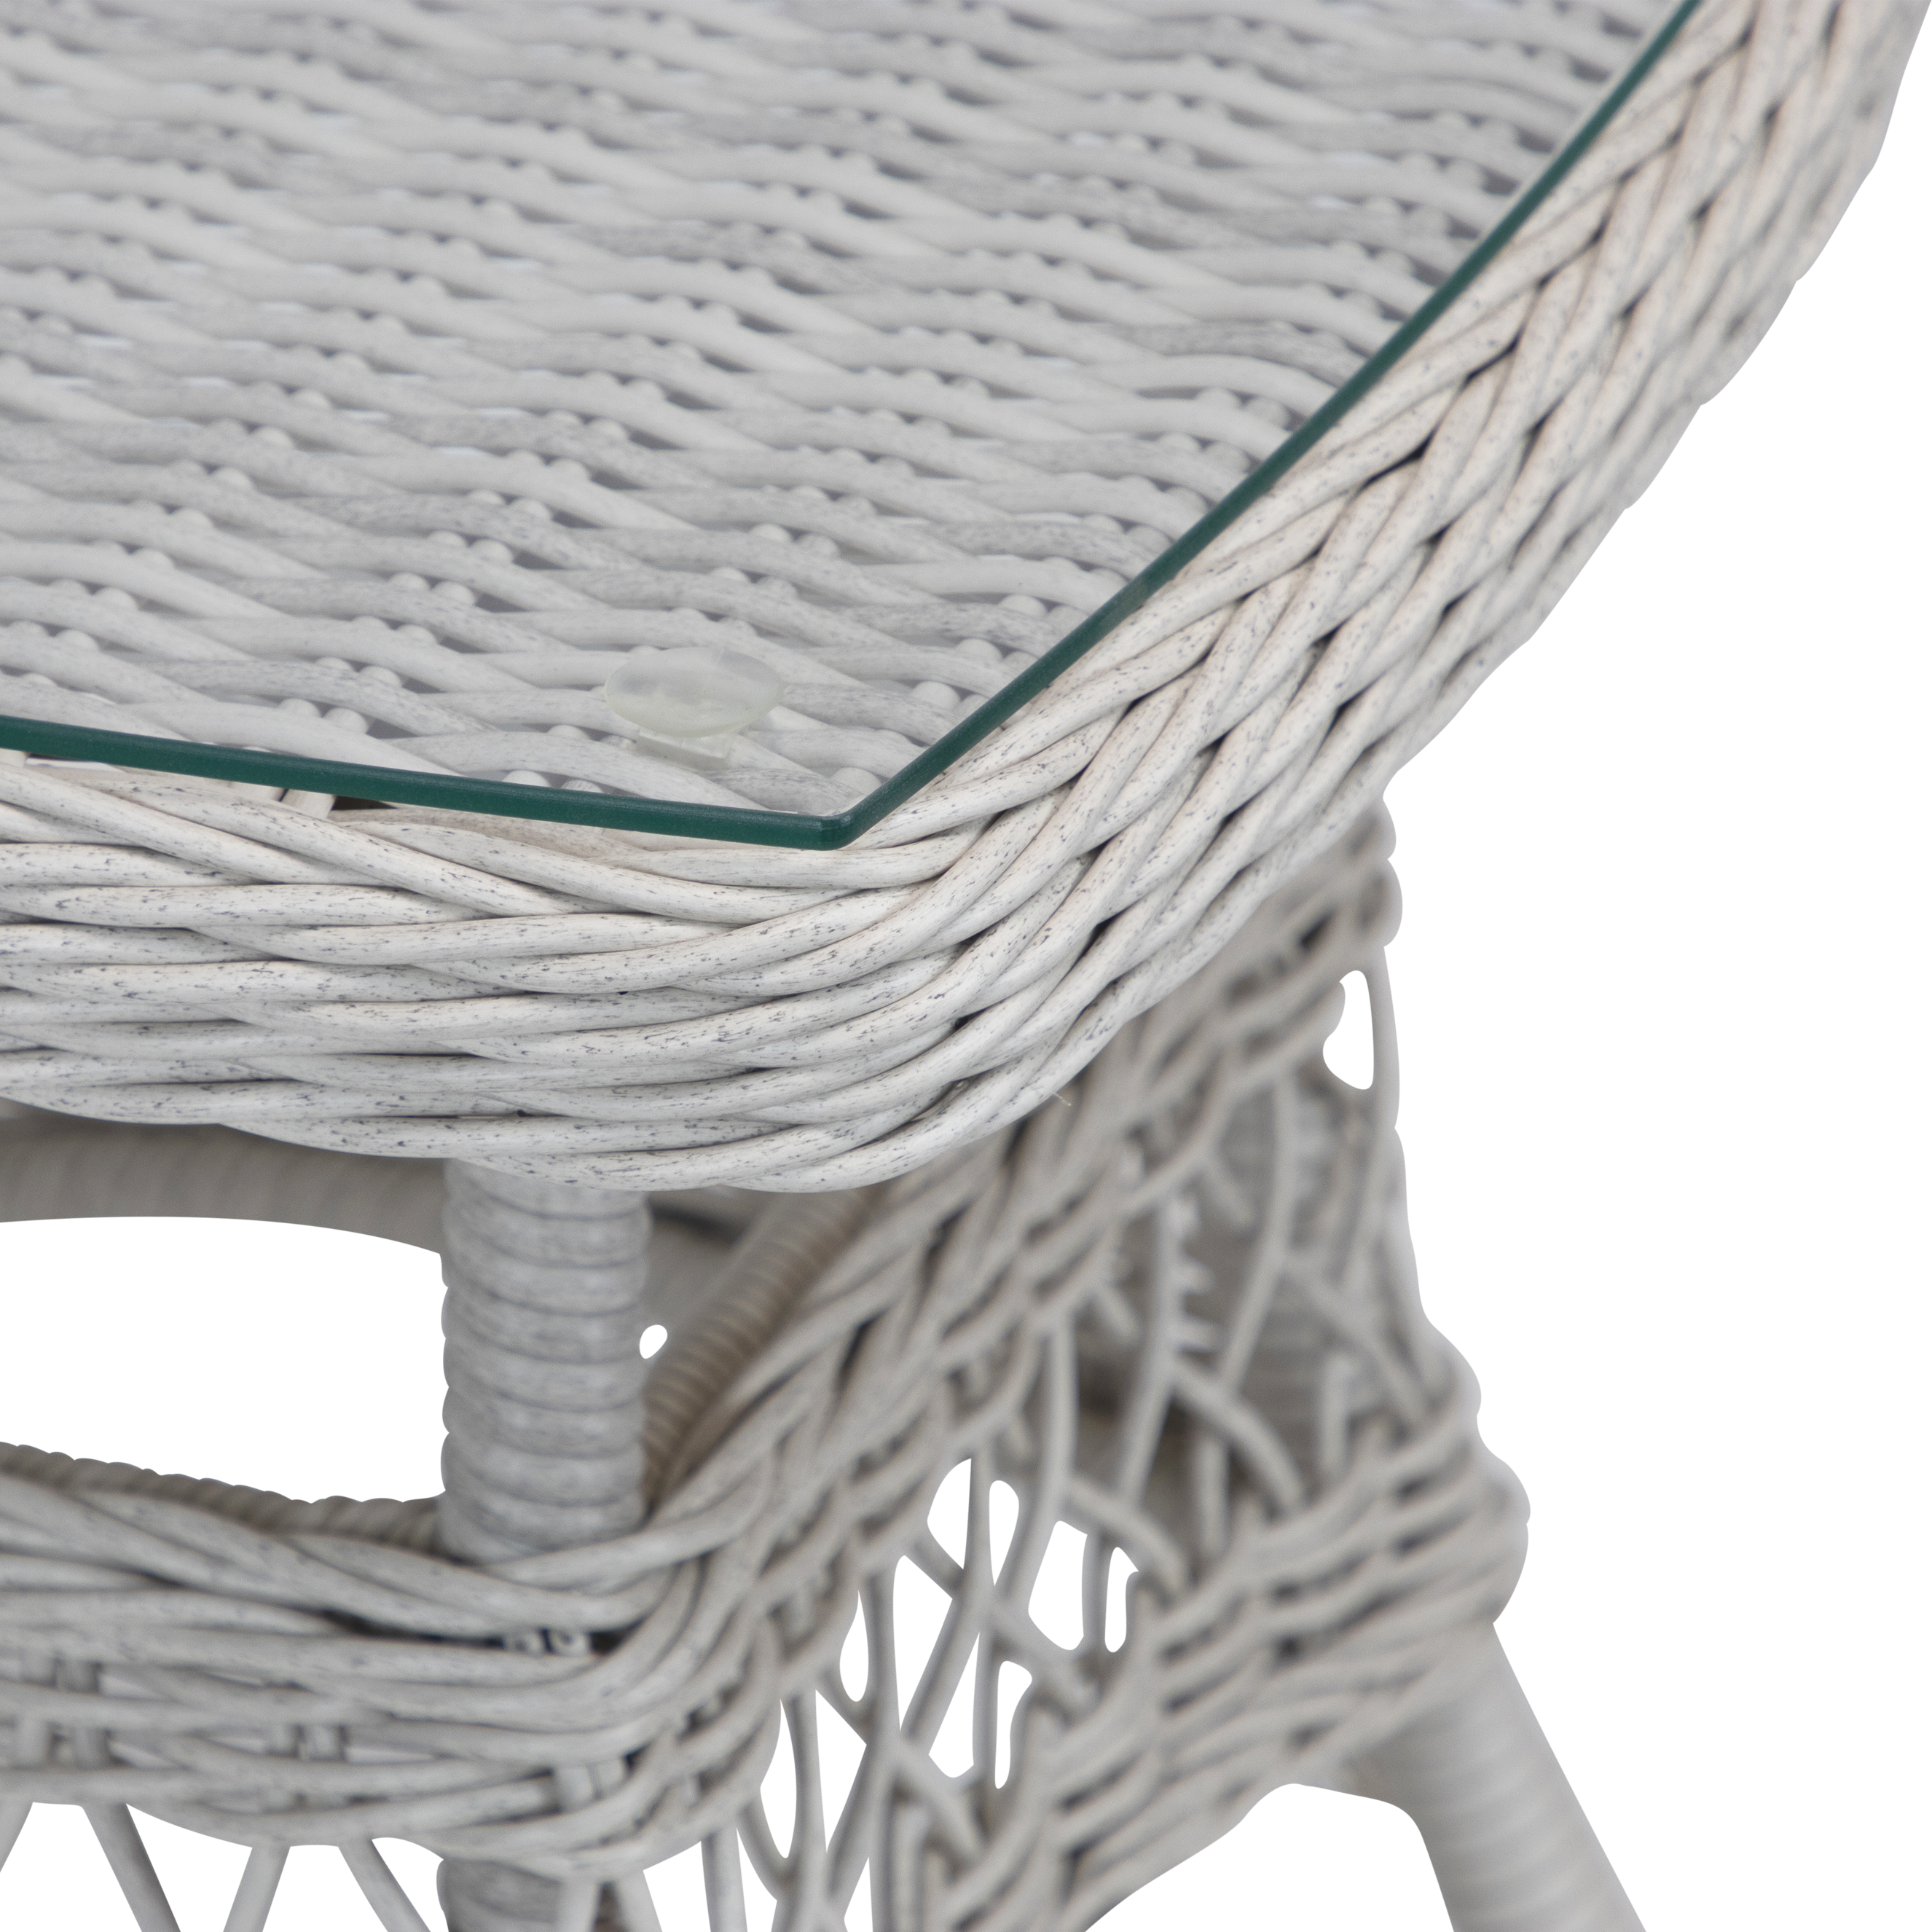 Hamptons Dining Chair 3pc Occasional in Surfmist Wicker and Dune Spunpoly Cushions